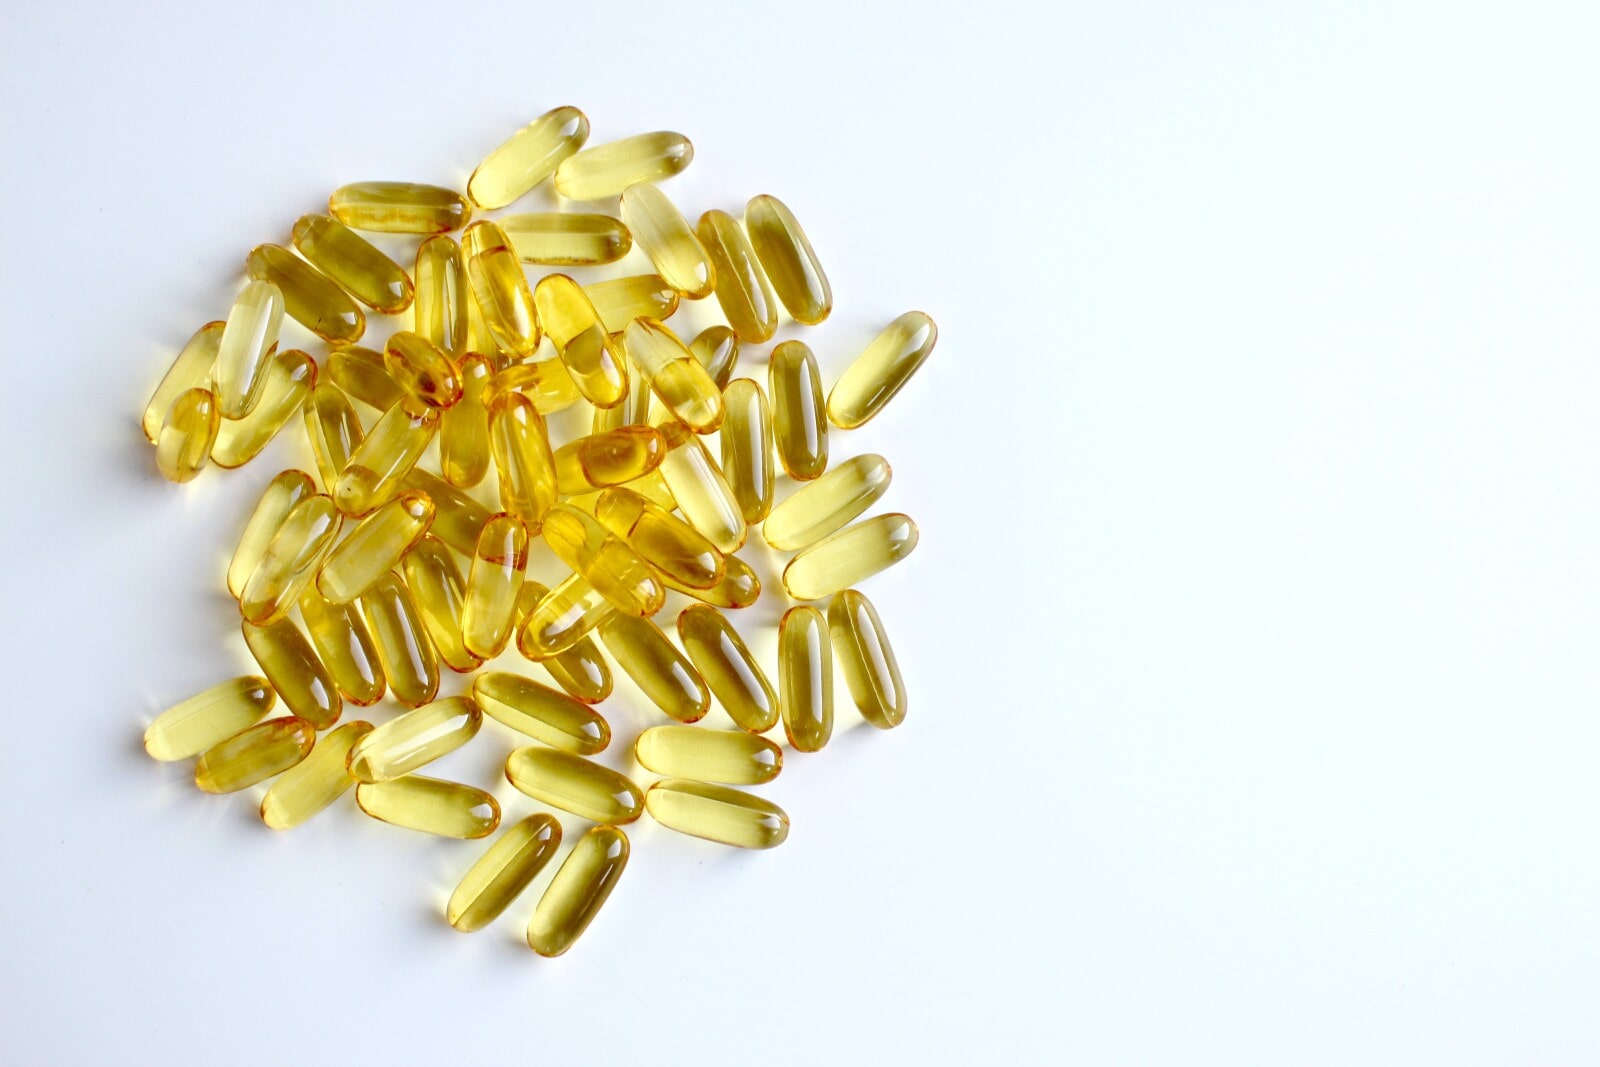 A pile of fish oil pills